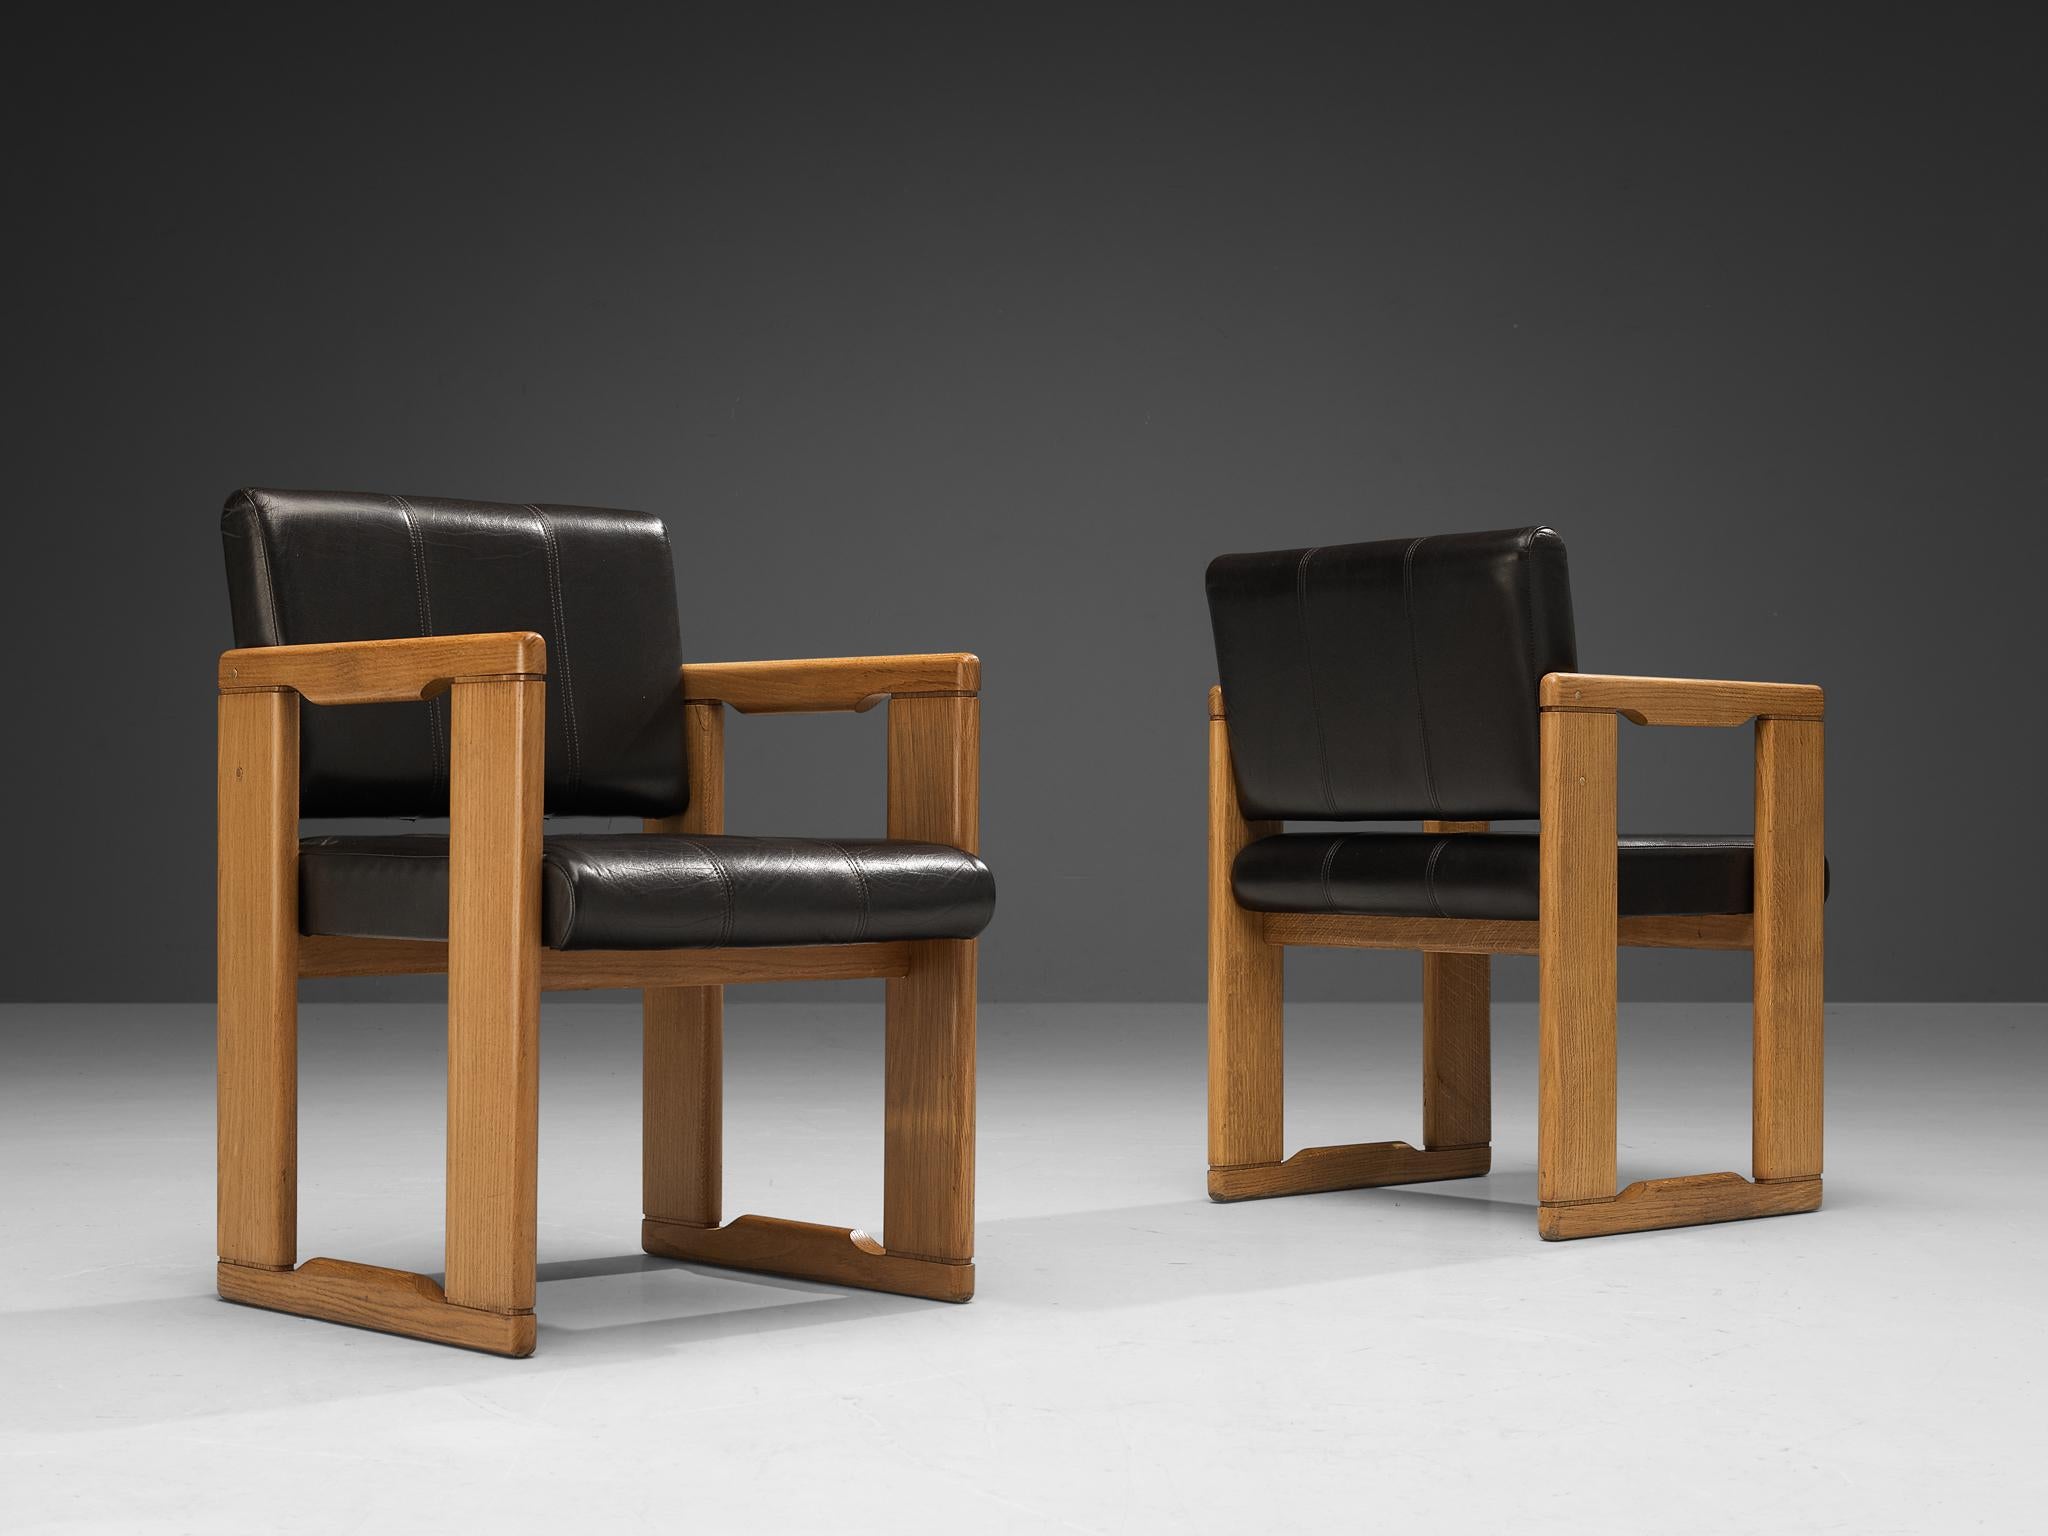 Set of six dining chairs, oak, leather, Italy, 1970s.

This delicate set of dining chairs truly intensifies the experience of sitting itself and is a standout in any modern room. The armchair is well-designed featuring clear lines and geometrical